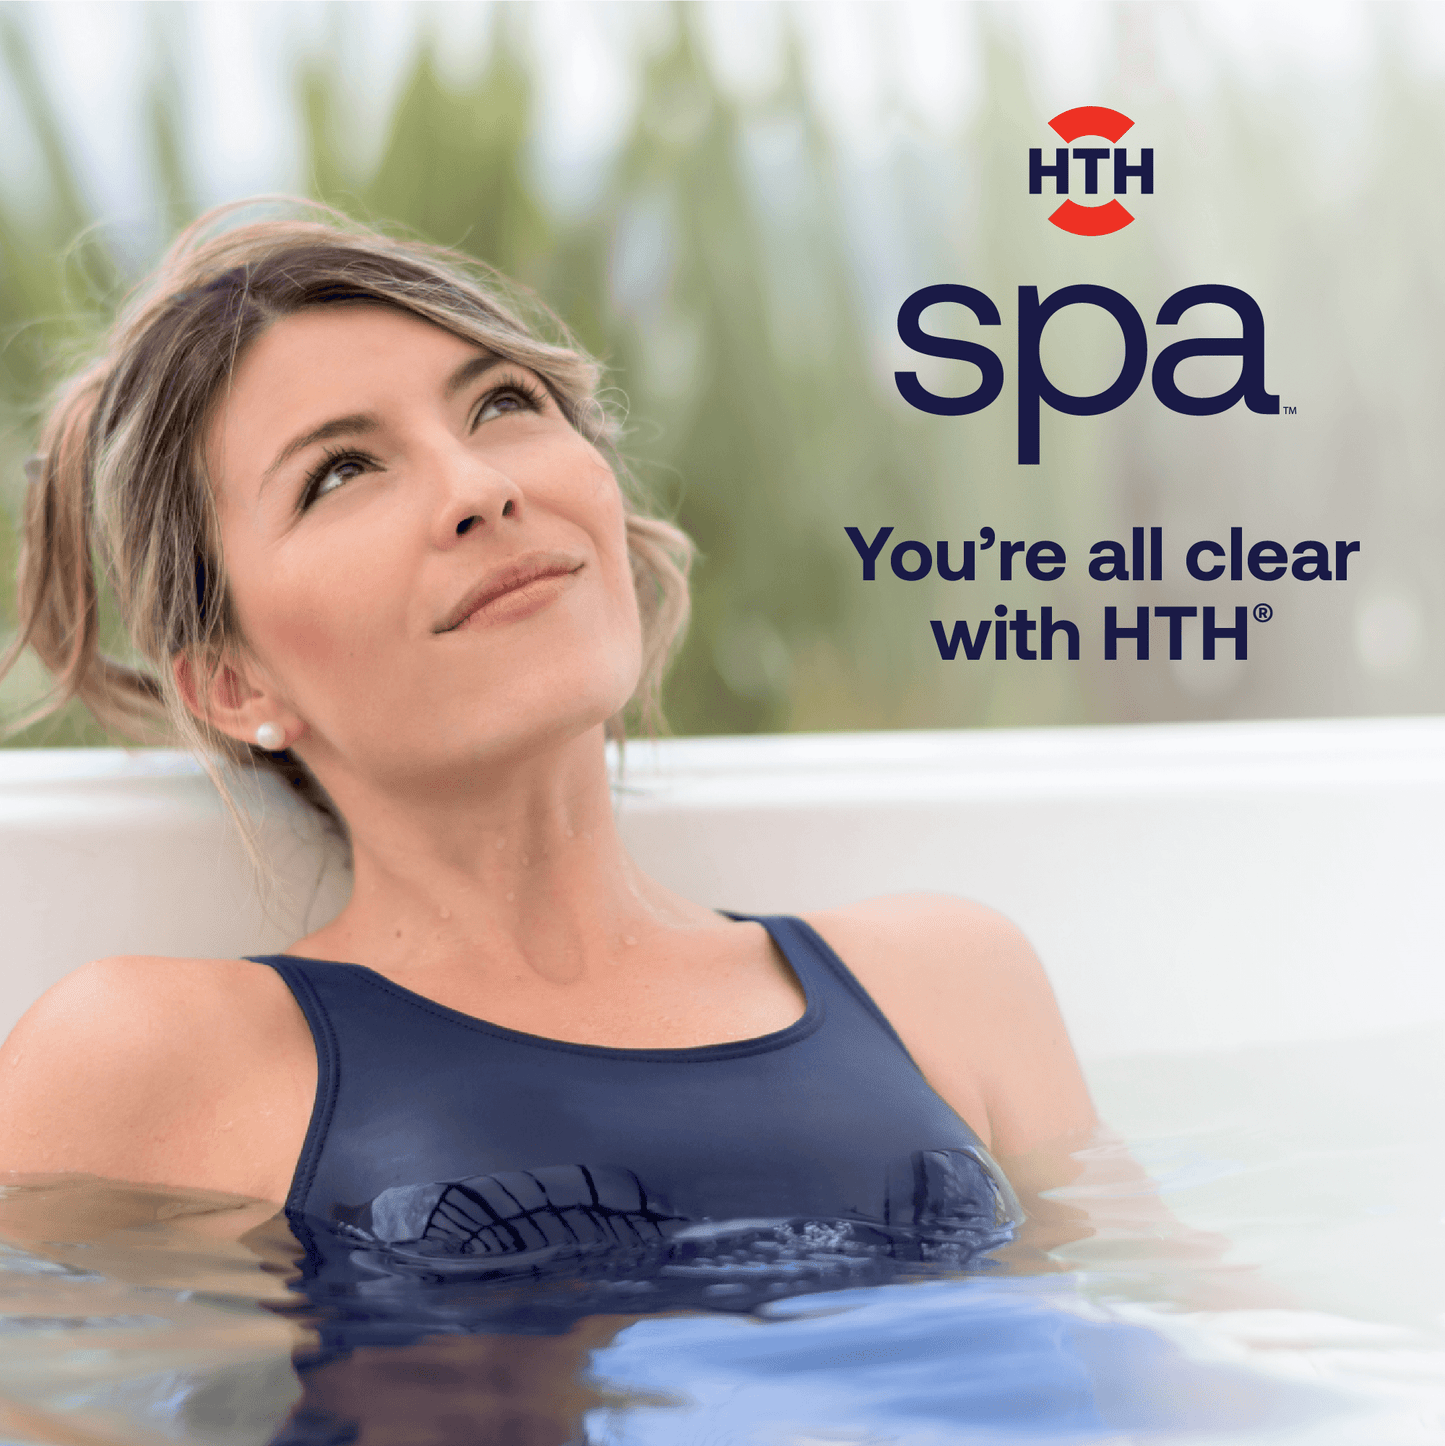 HTH spa™ Care Alkalinity Up